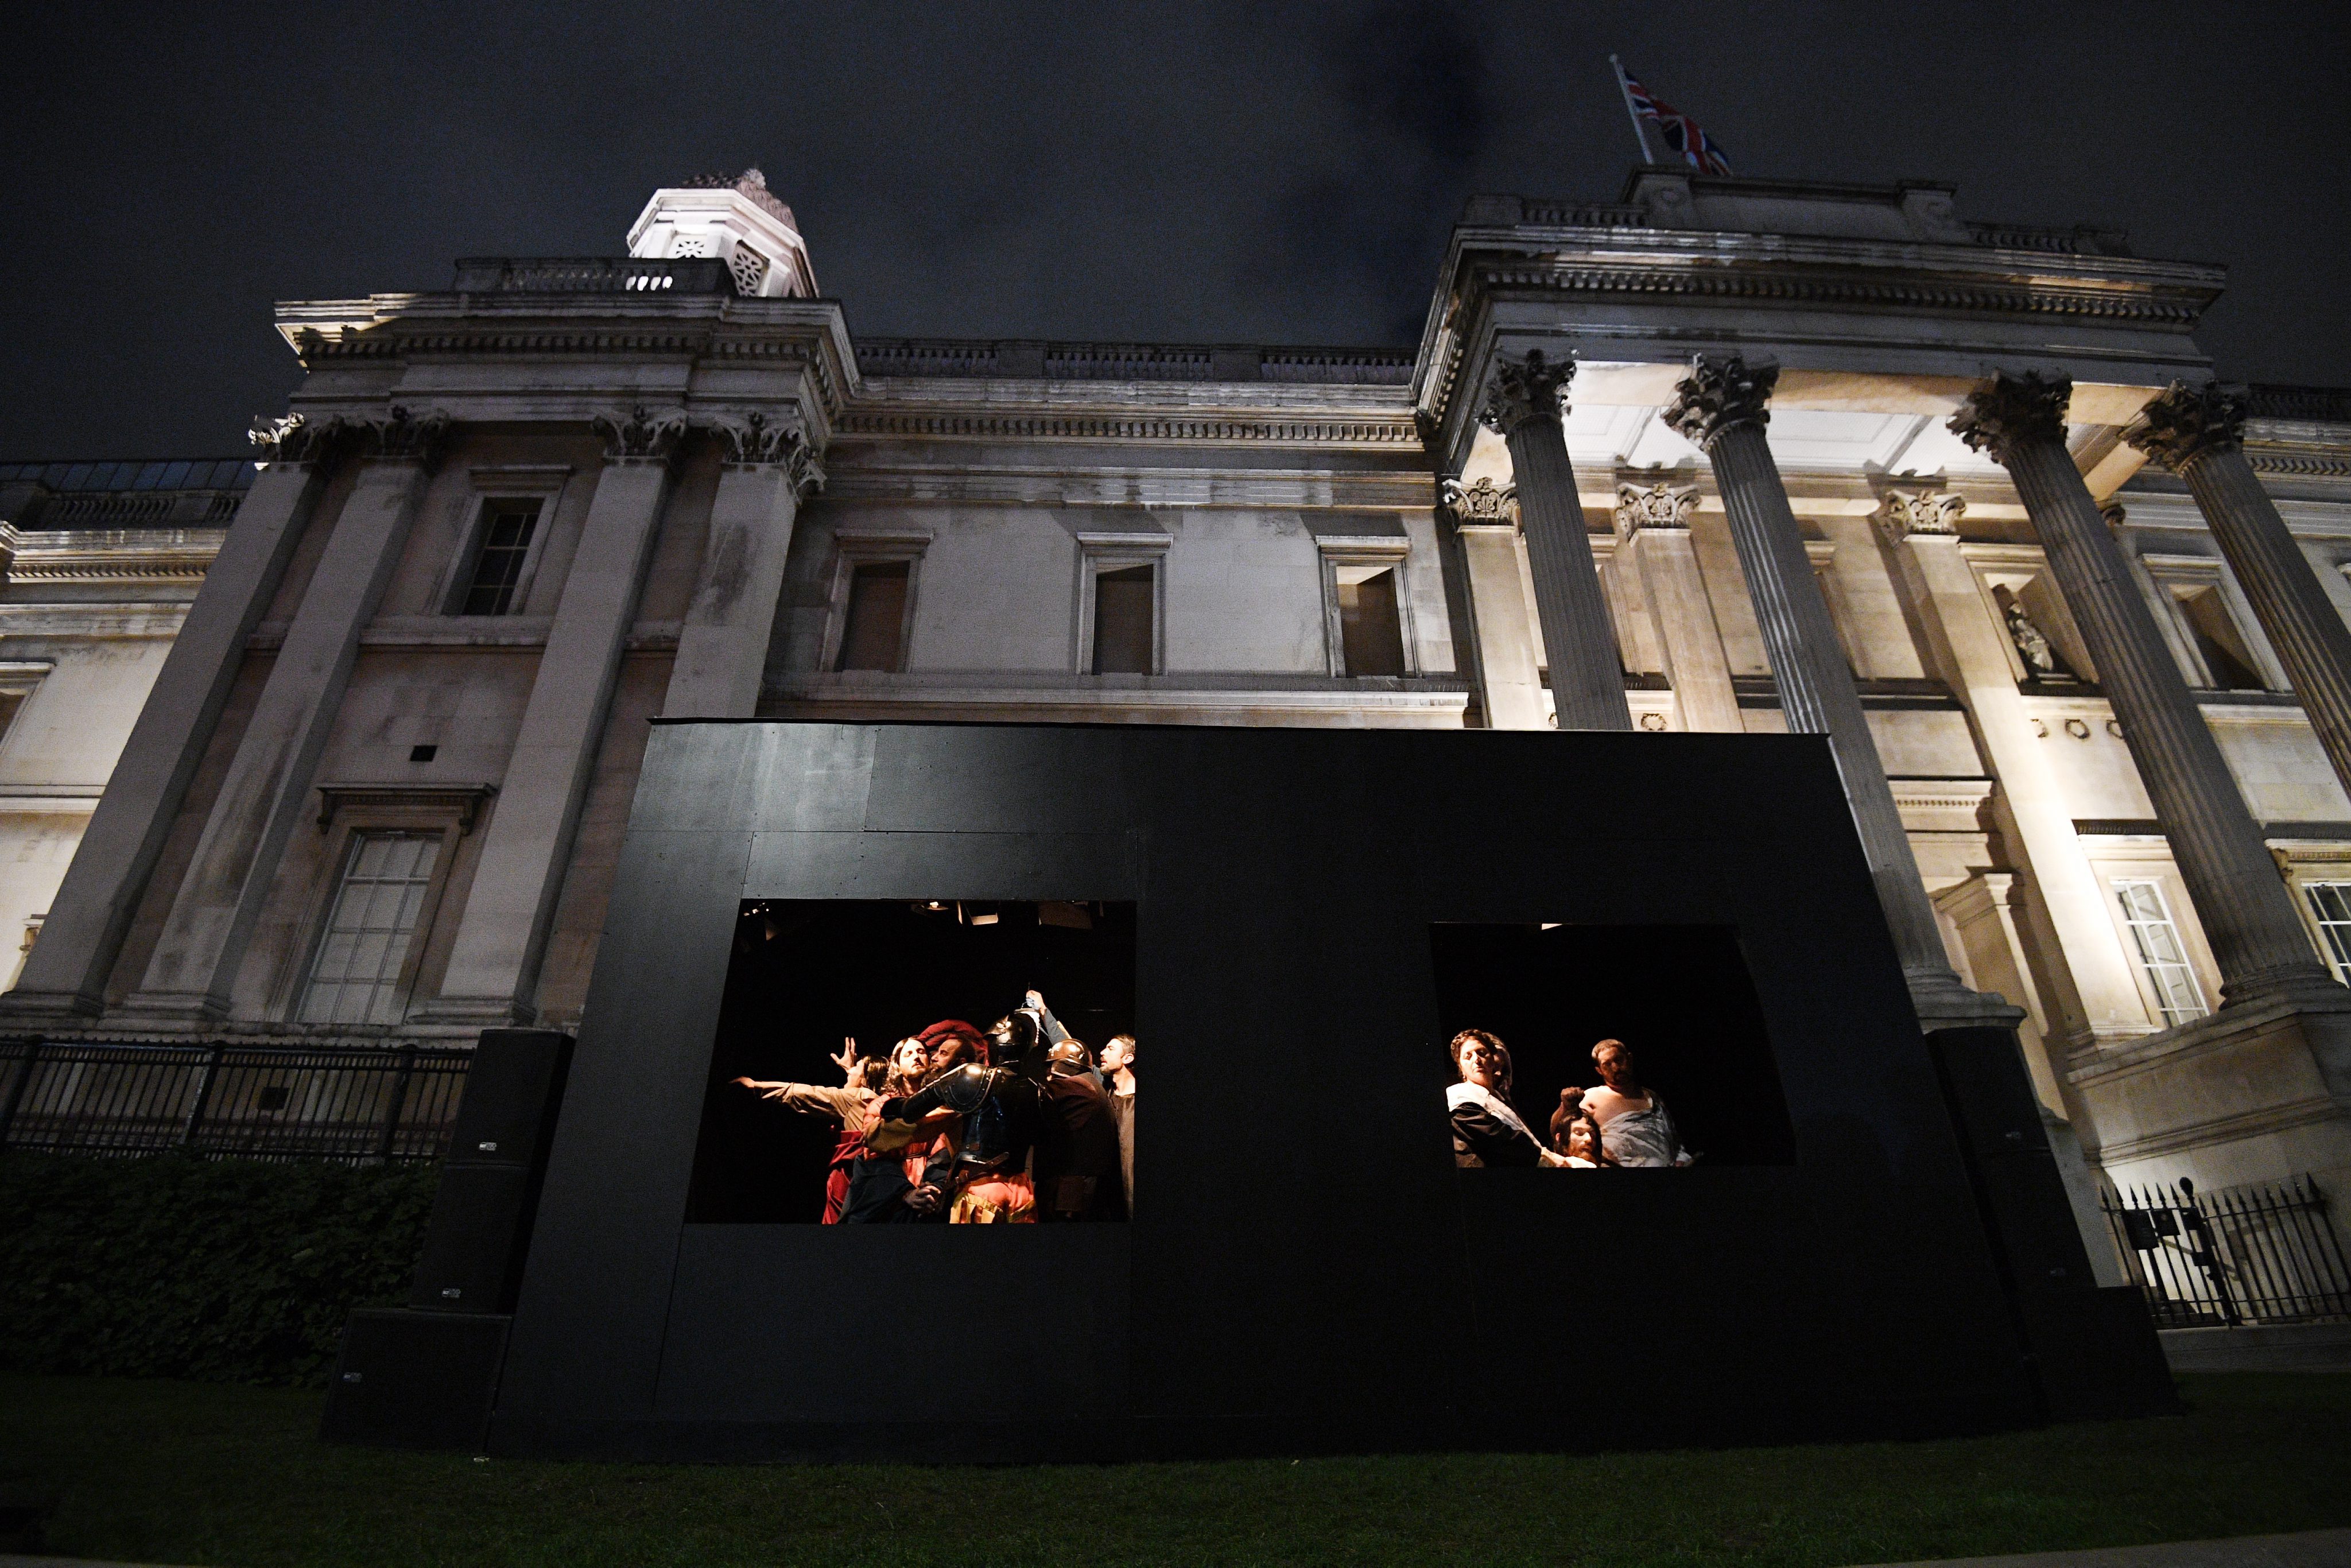 2016-10-28 17:40:13 epa05607471 Two Caravaggio masterpieces are being recreated as living paintings in front of the National Gallerys building on Trafalgar Square in London, Britain, 28 October 2016. To celebrate the Beyond Caravaggio exhibition the gallery has commissioned renowned Italian performance troupe Quadri Plastici to recreate The Taking of Christ using models, lights, props, and box frames together with music. EPA/FACUNDO ARRIZABALAGA